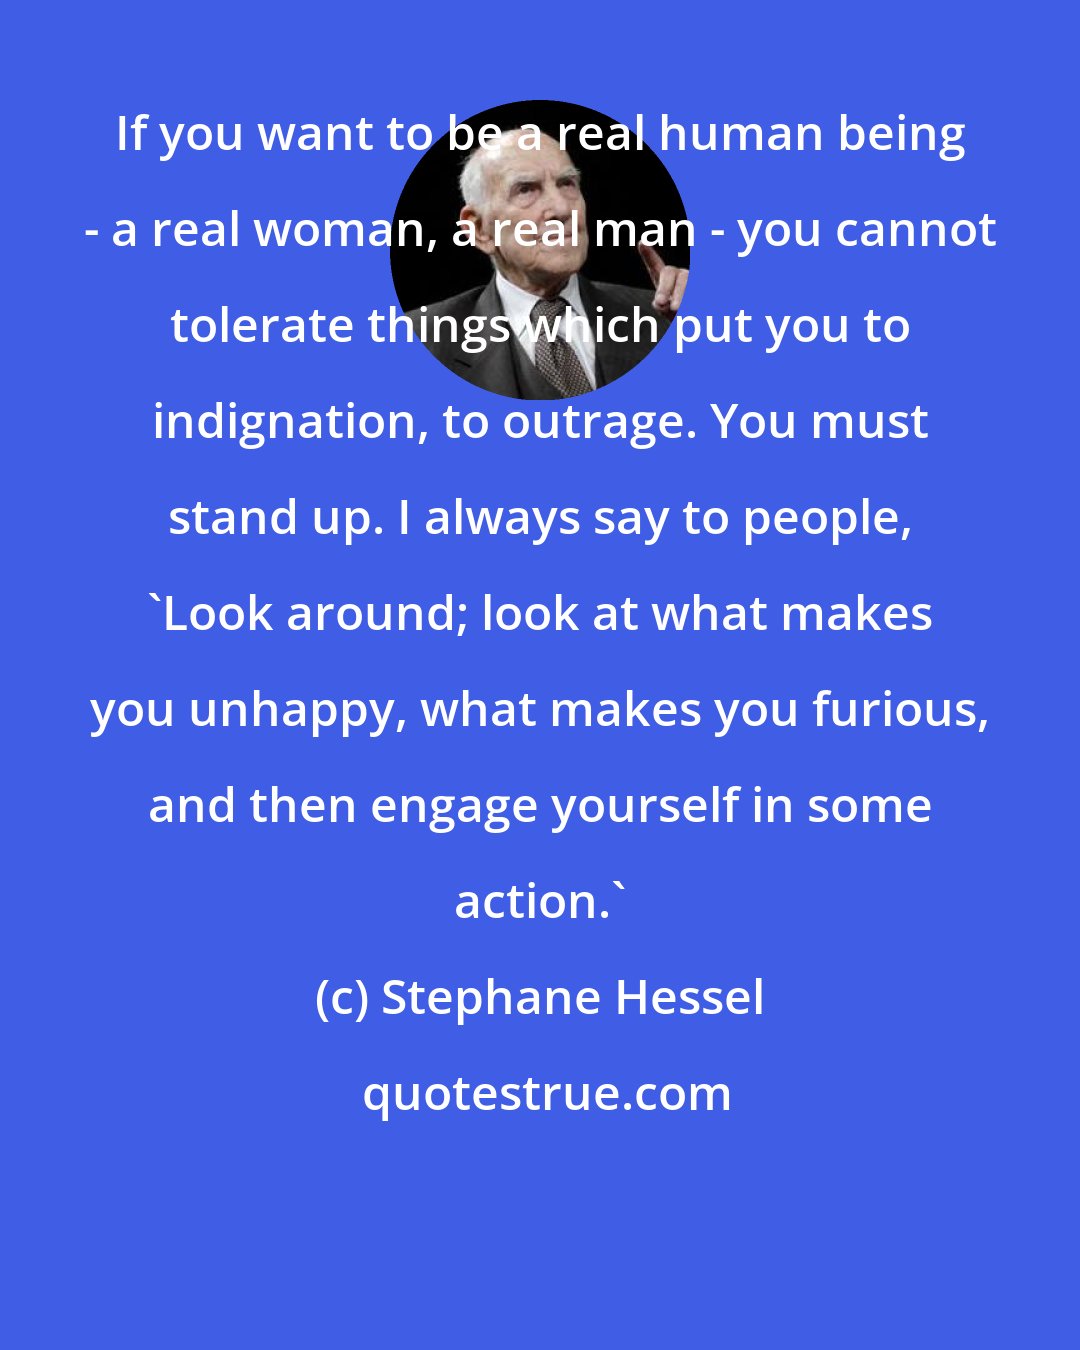 Stephane Hessel: If you want to be a real human being - a real woman, a real man - you cannot tolerate things which put you to indignation, to outrage. You must stand up. I always say to people, 'Look around; look at what makes you unhappy, what makes you furious, and then engage yourself in some action.'